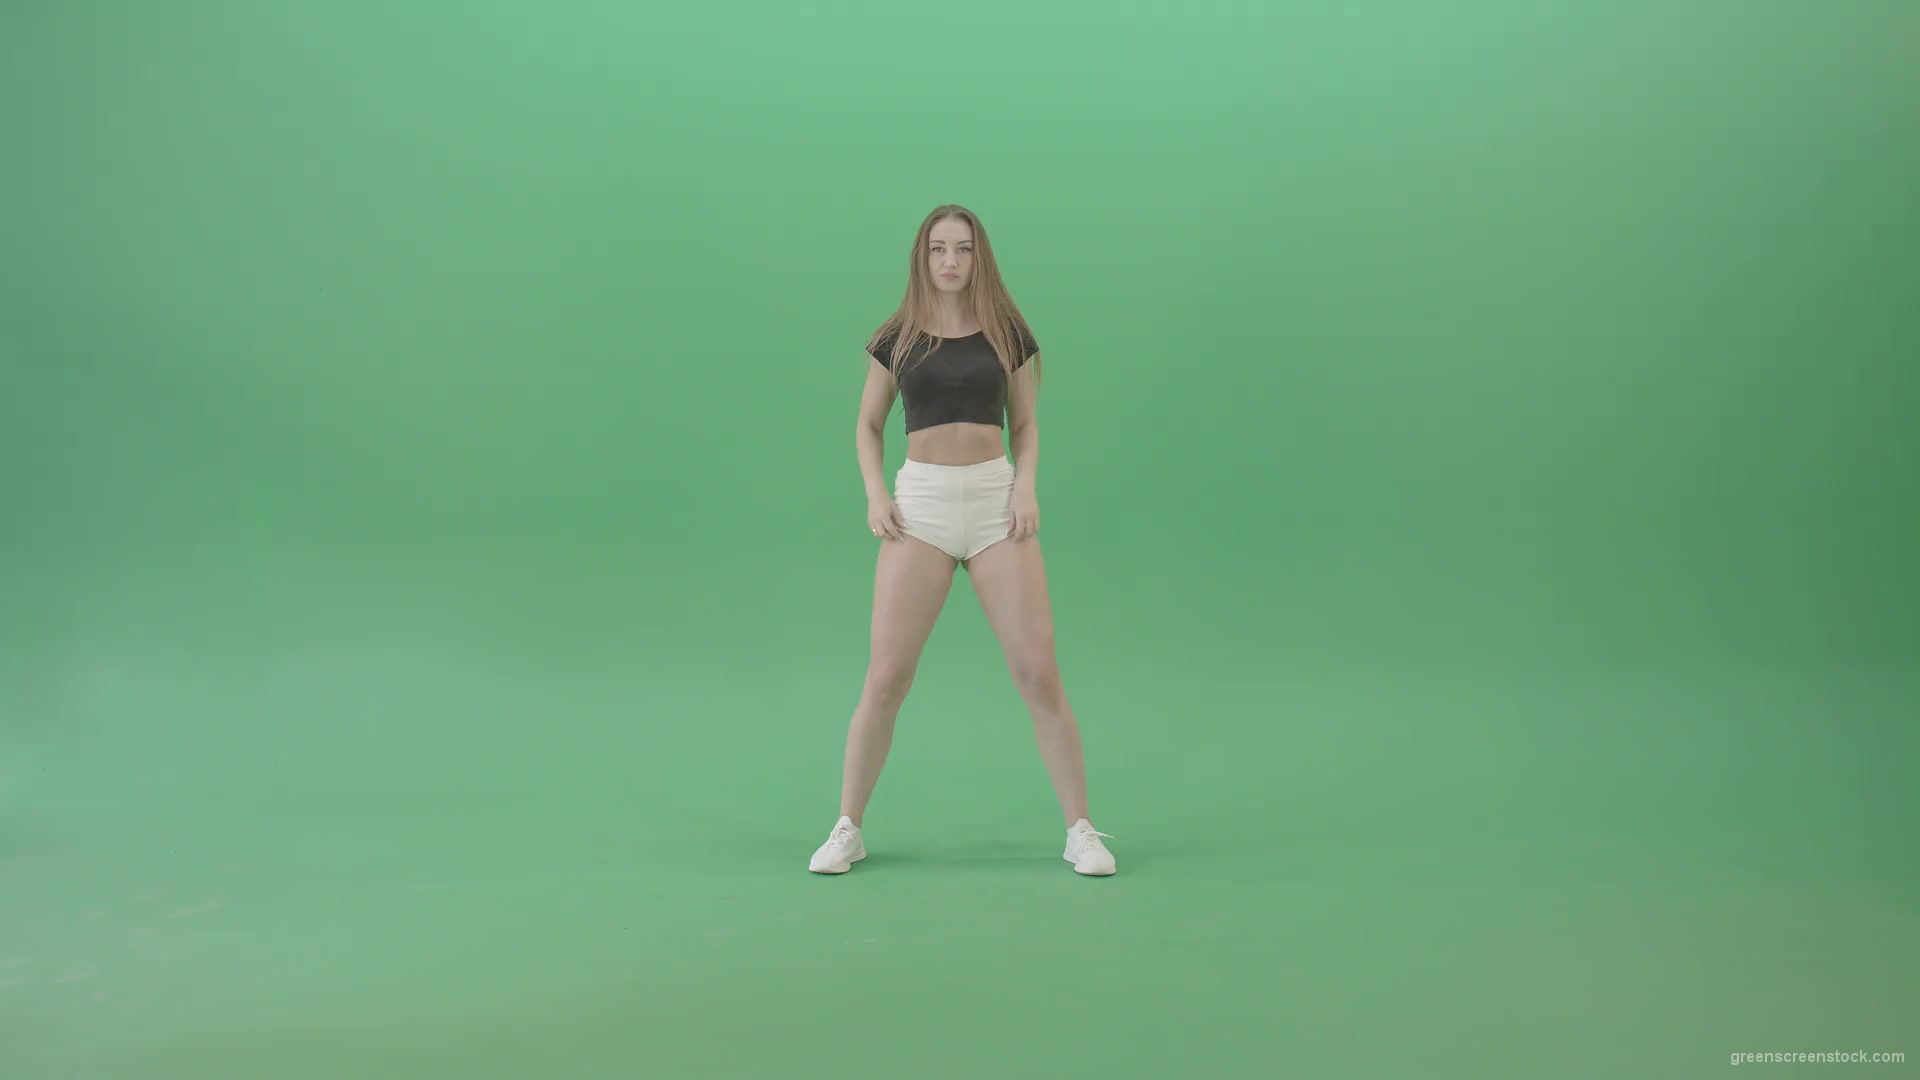 Beauty-girl-sрaking-ass-and-hips-dancing-Twerk-Afro-Dance-isolated-on-green-screen-4K-Video-Footage-1920_001 Green Screen Stock